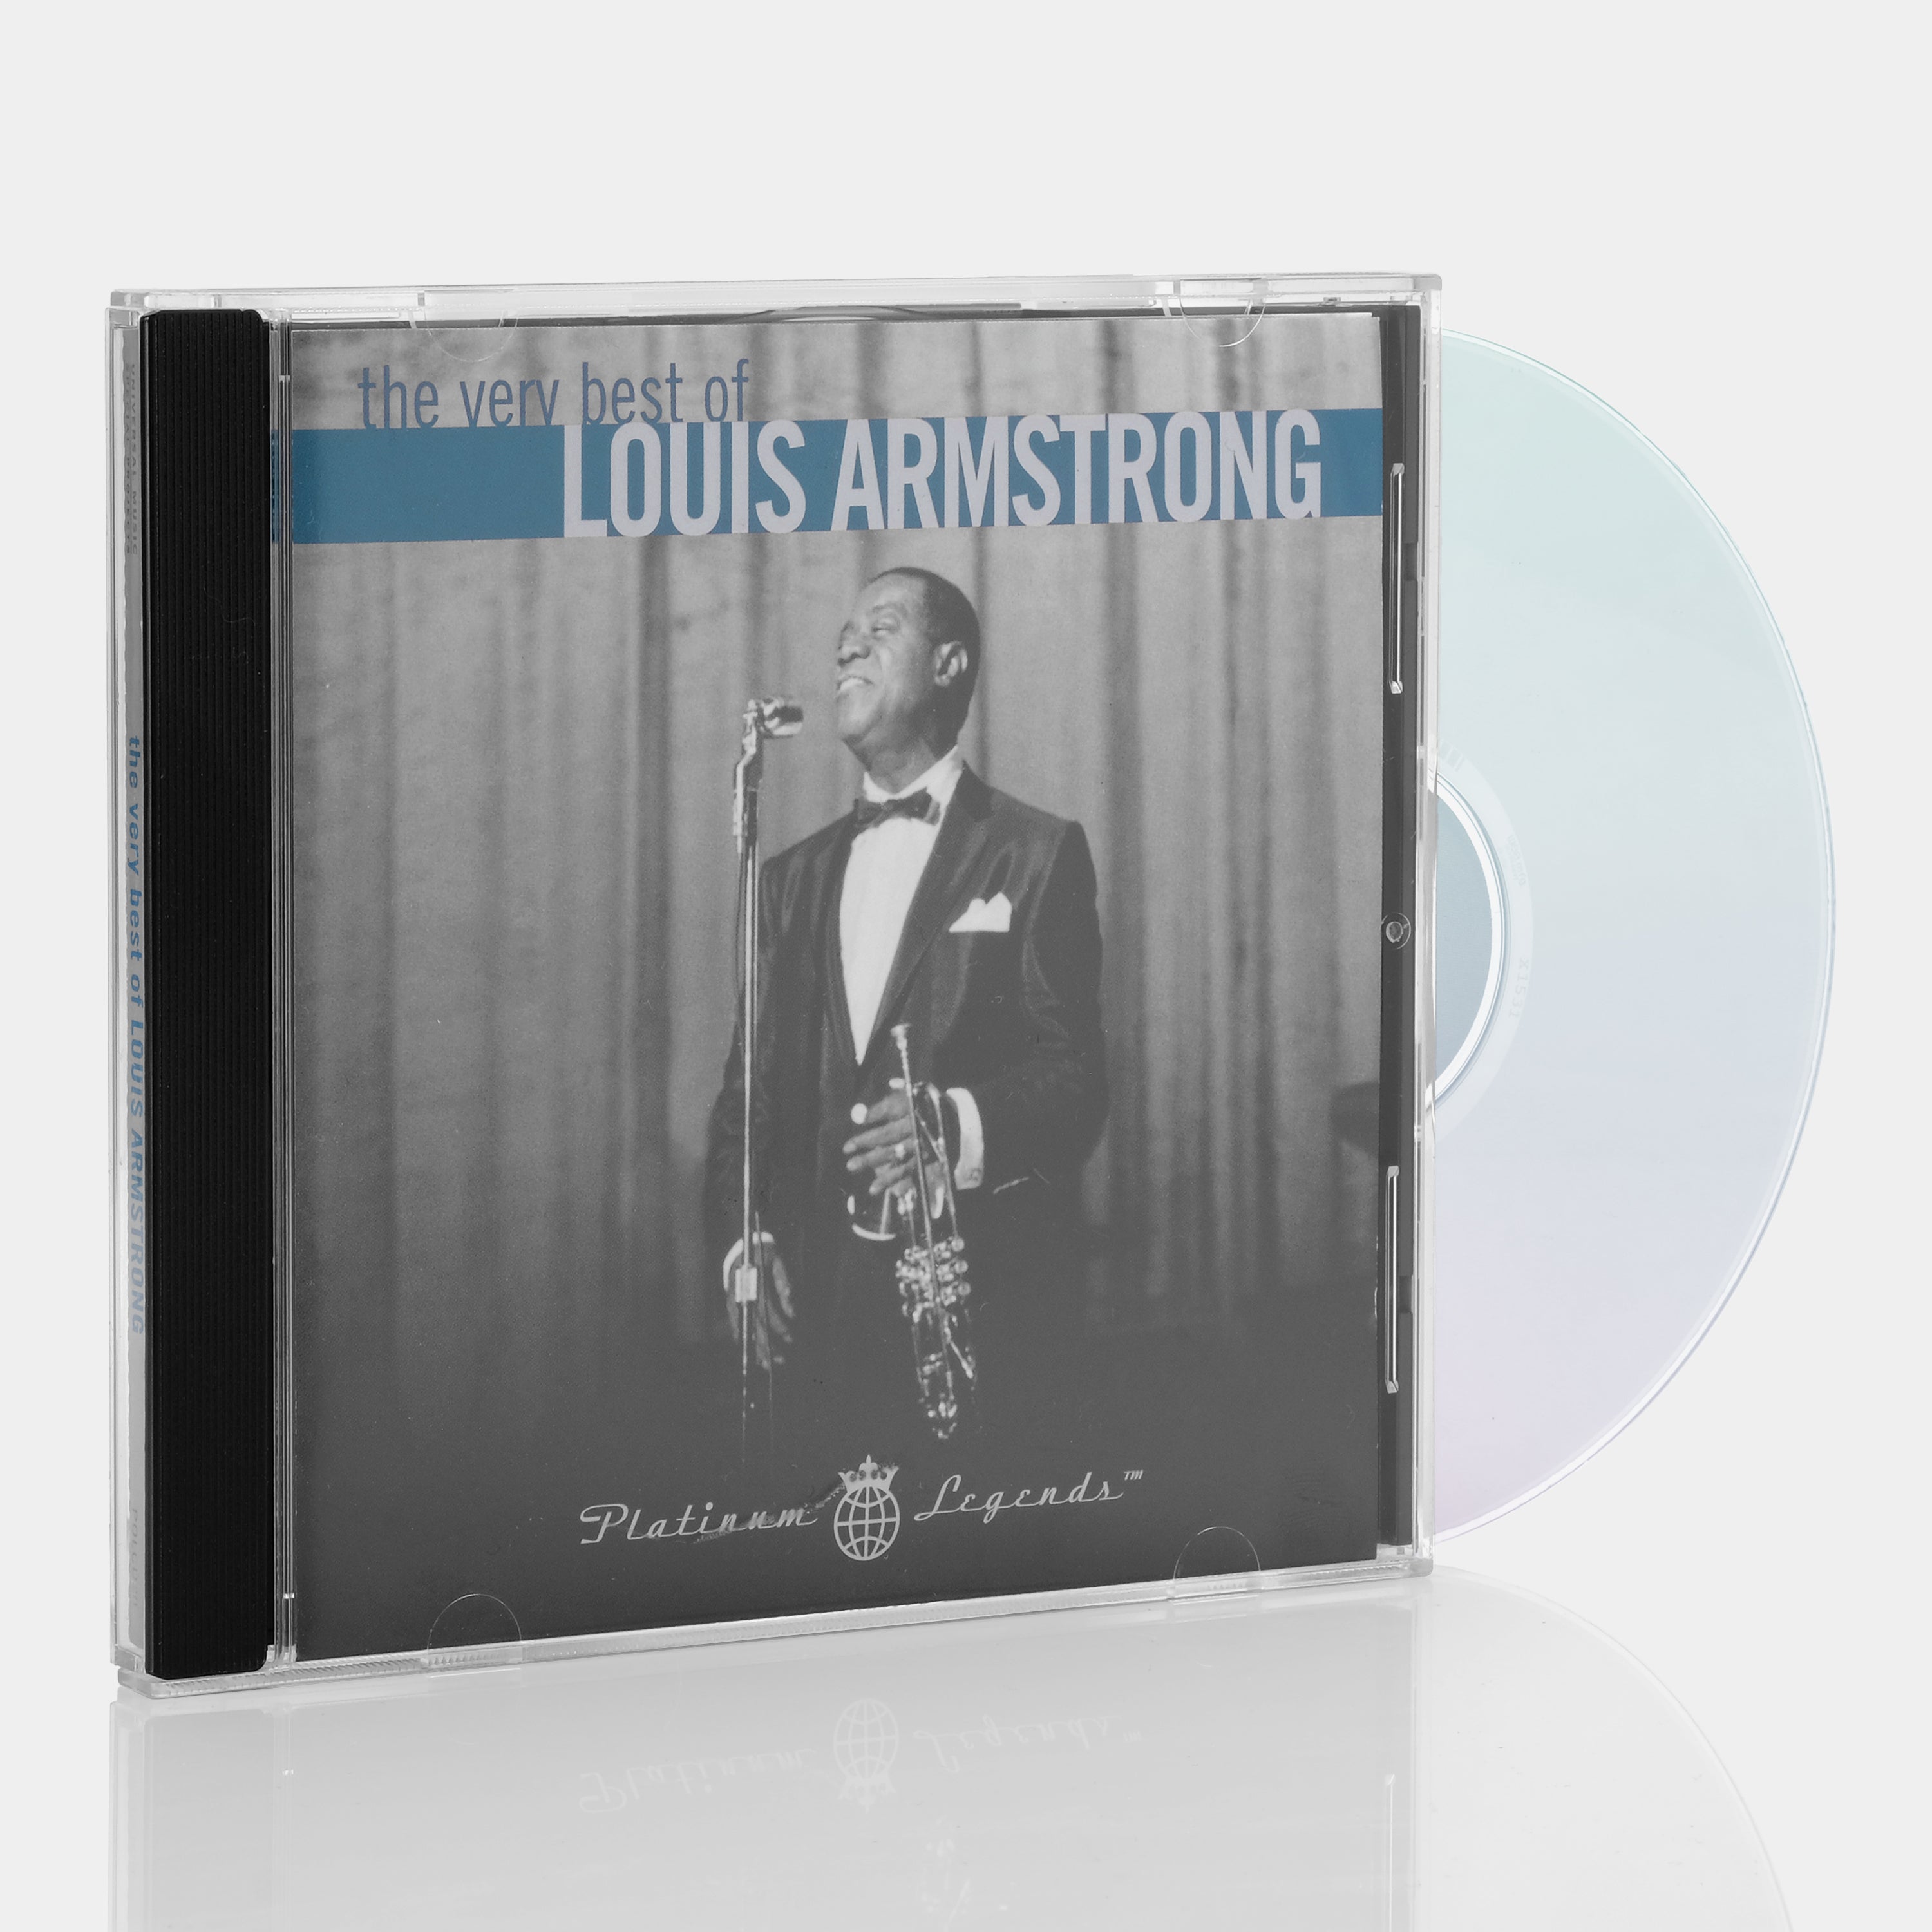 Louis Armstrong - The Very Best Of Louis Armstrong CD